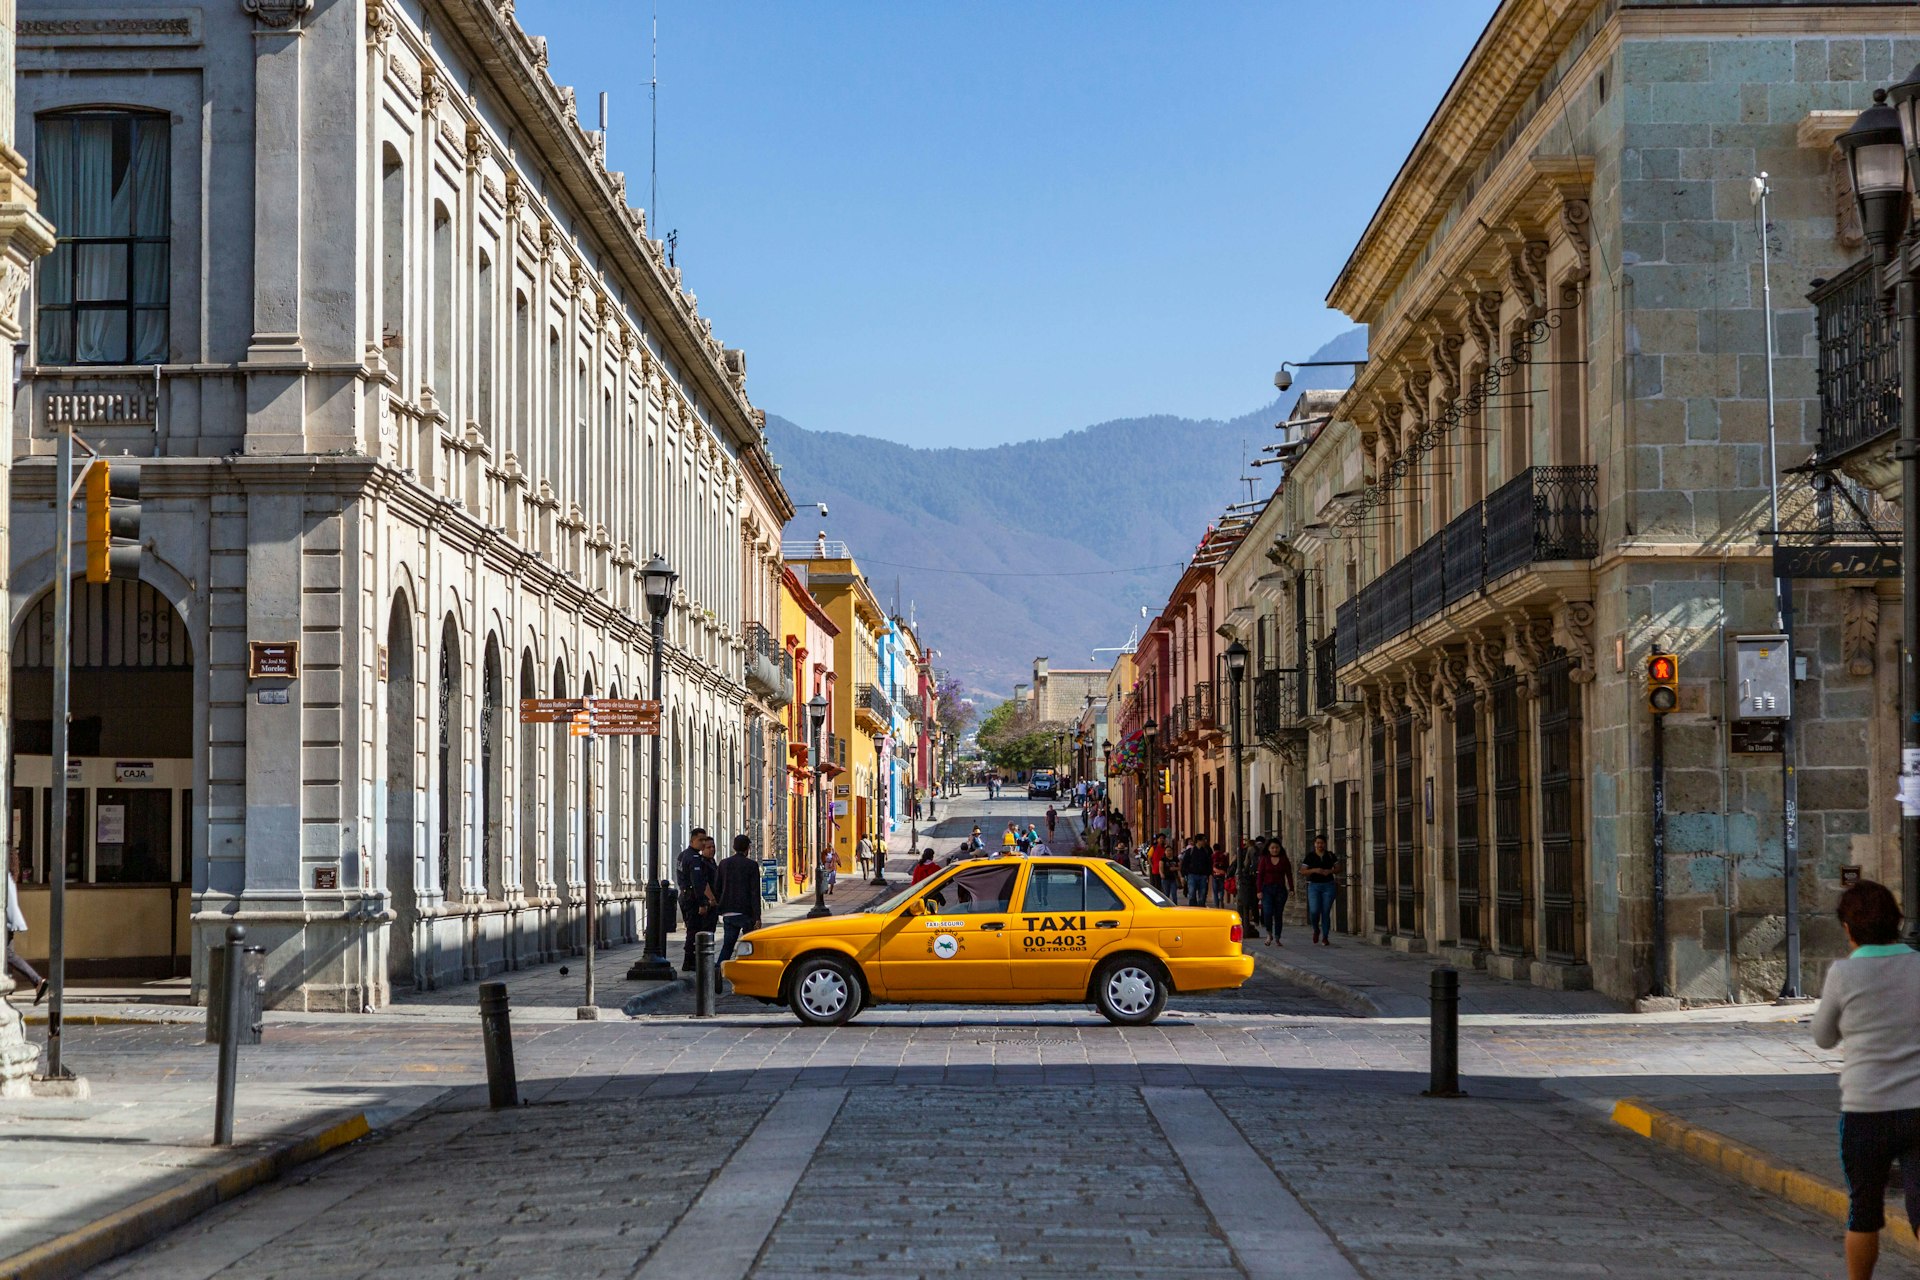 A sunny morning in Oaxaca - a yellow taxi in the center of a big avenue with some people walking by 